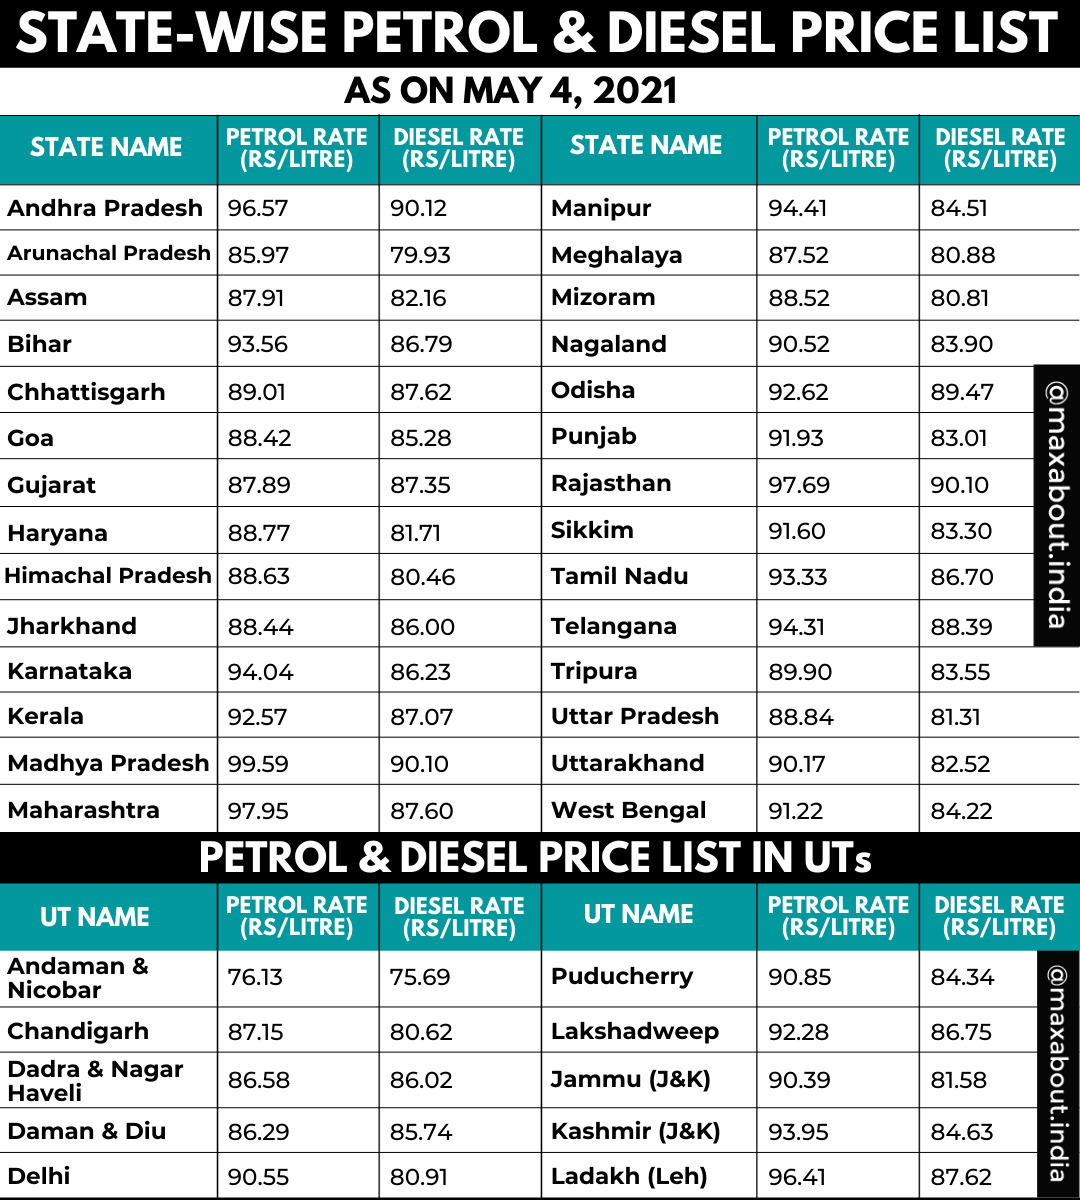 StateWise Petrol and Diesel Rates in India (May 4, 2021)